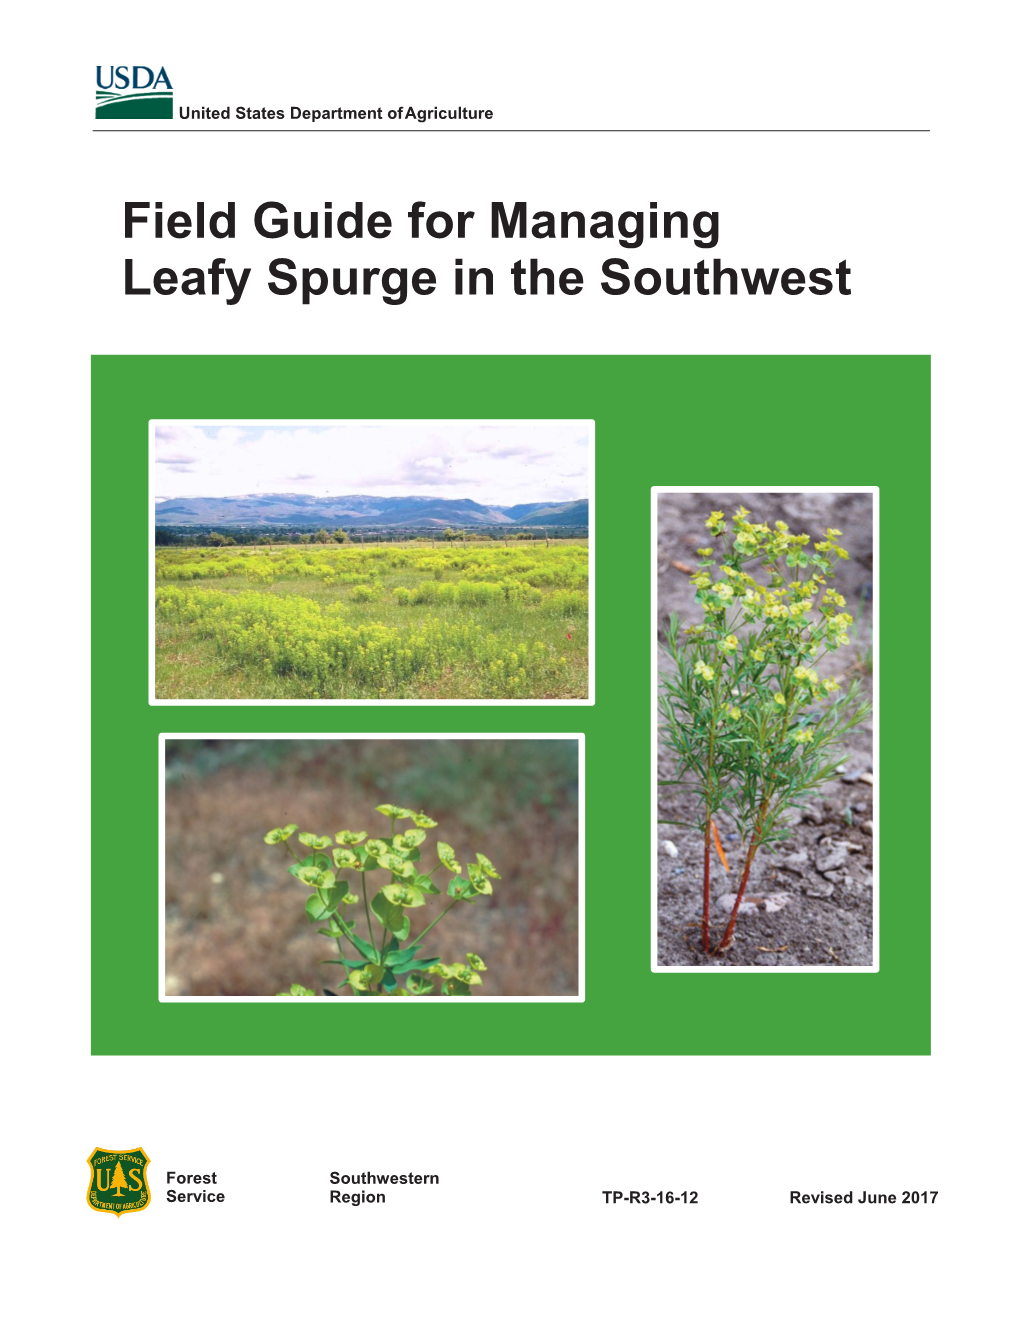 Field Guide for Managing Leafy Spurge in the Southwest